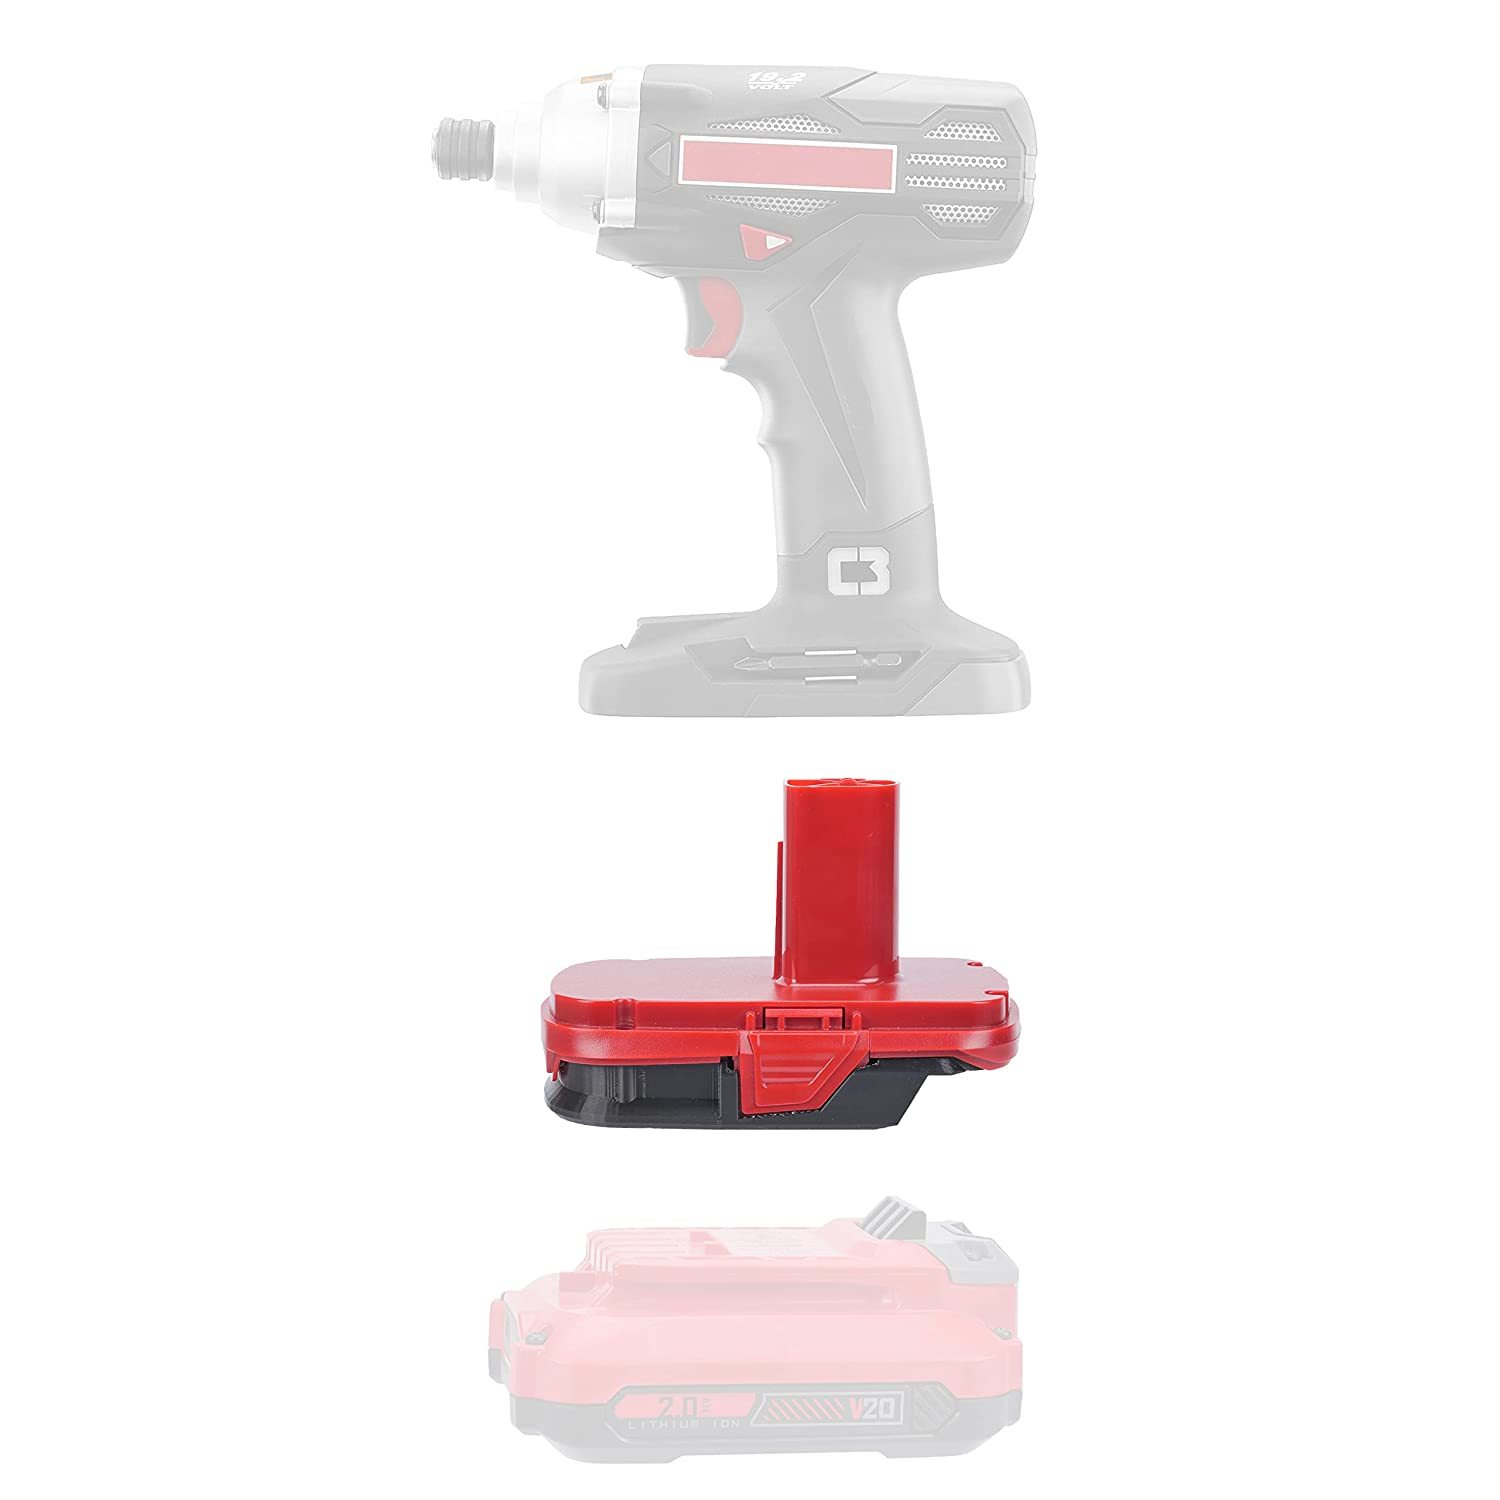 1X Adapter Only Fits Craftsman 19.2V Old Style Cordless Tools Compatible With Cr